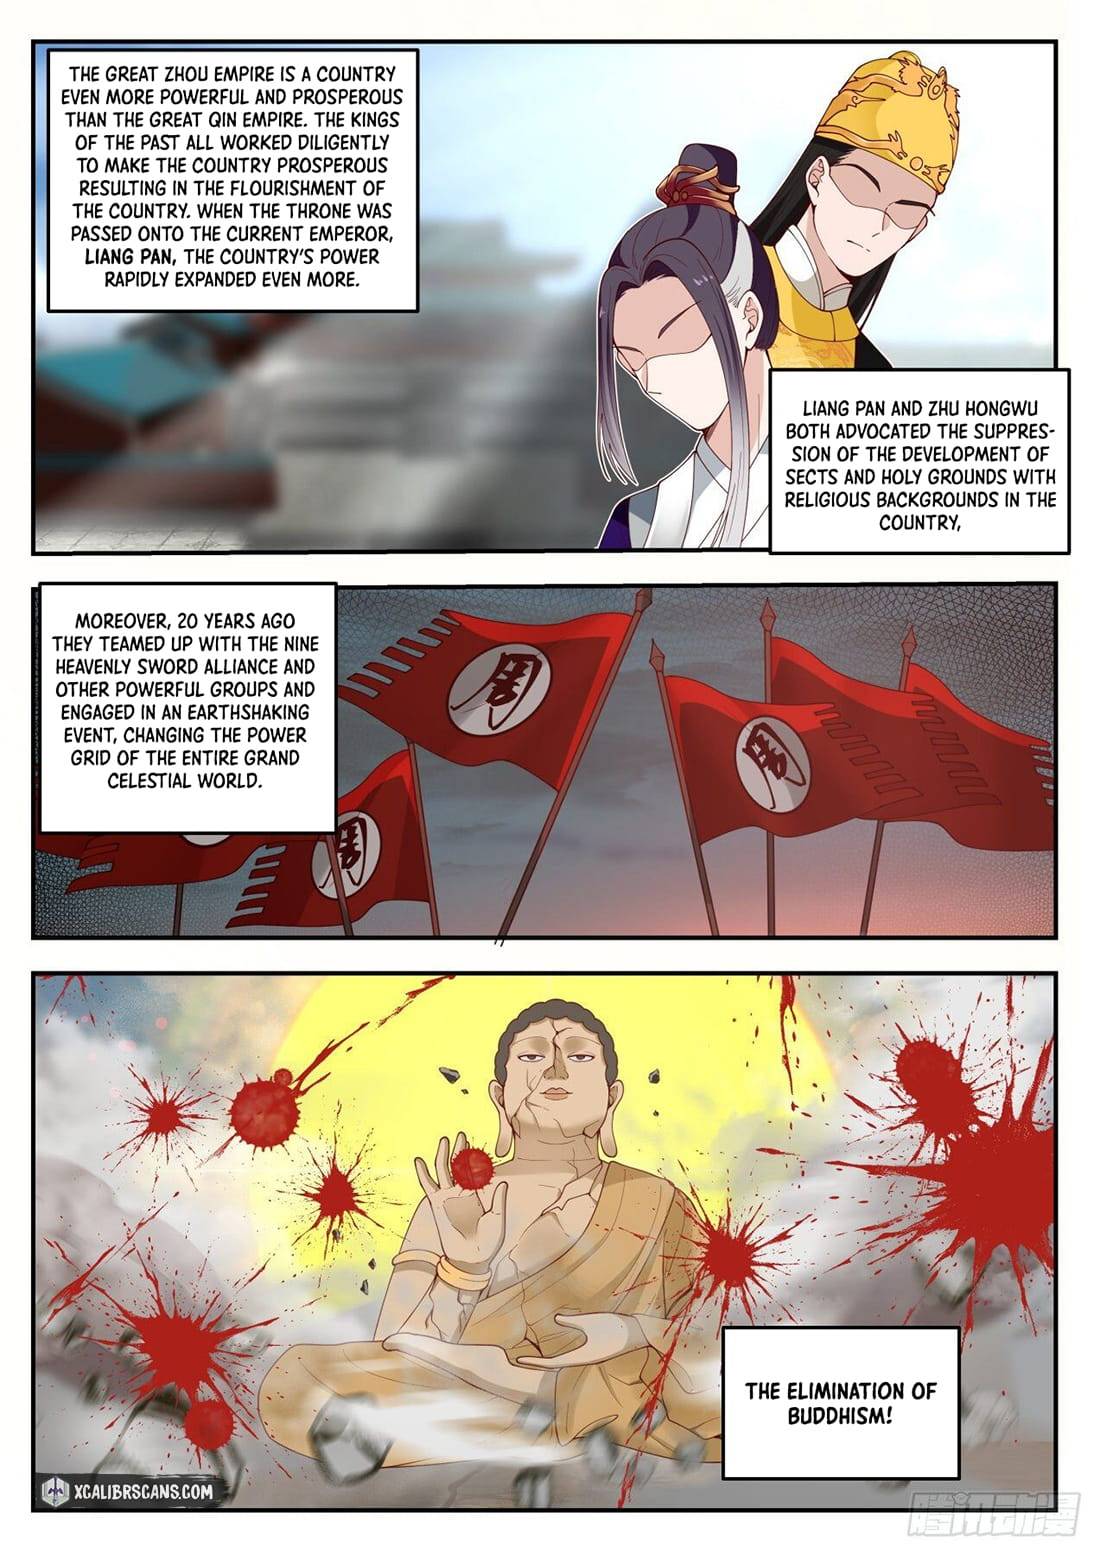 History's Number 1 Founder chapter 24 page 7